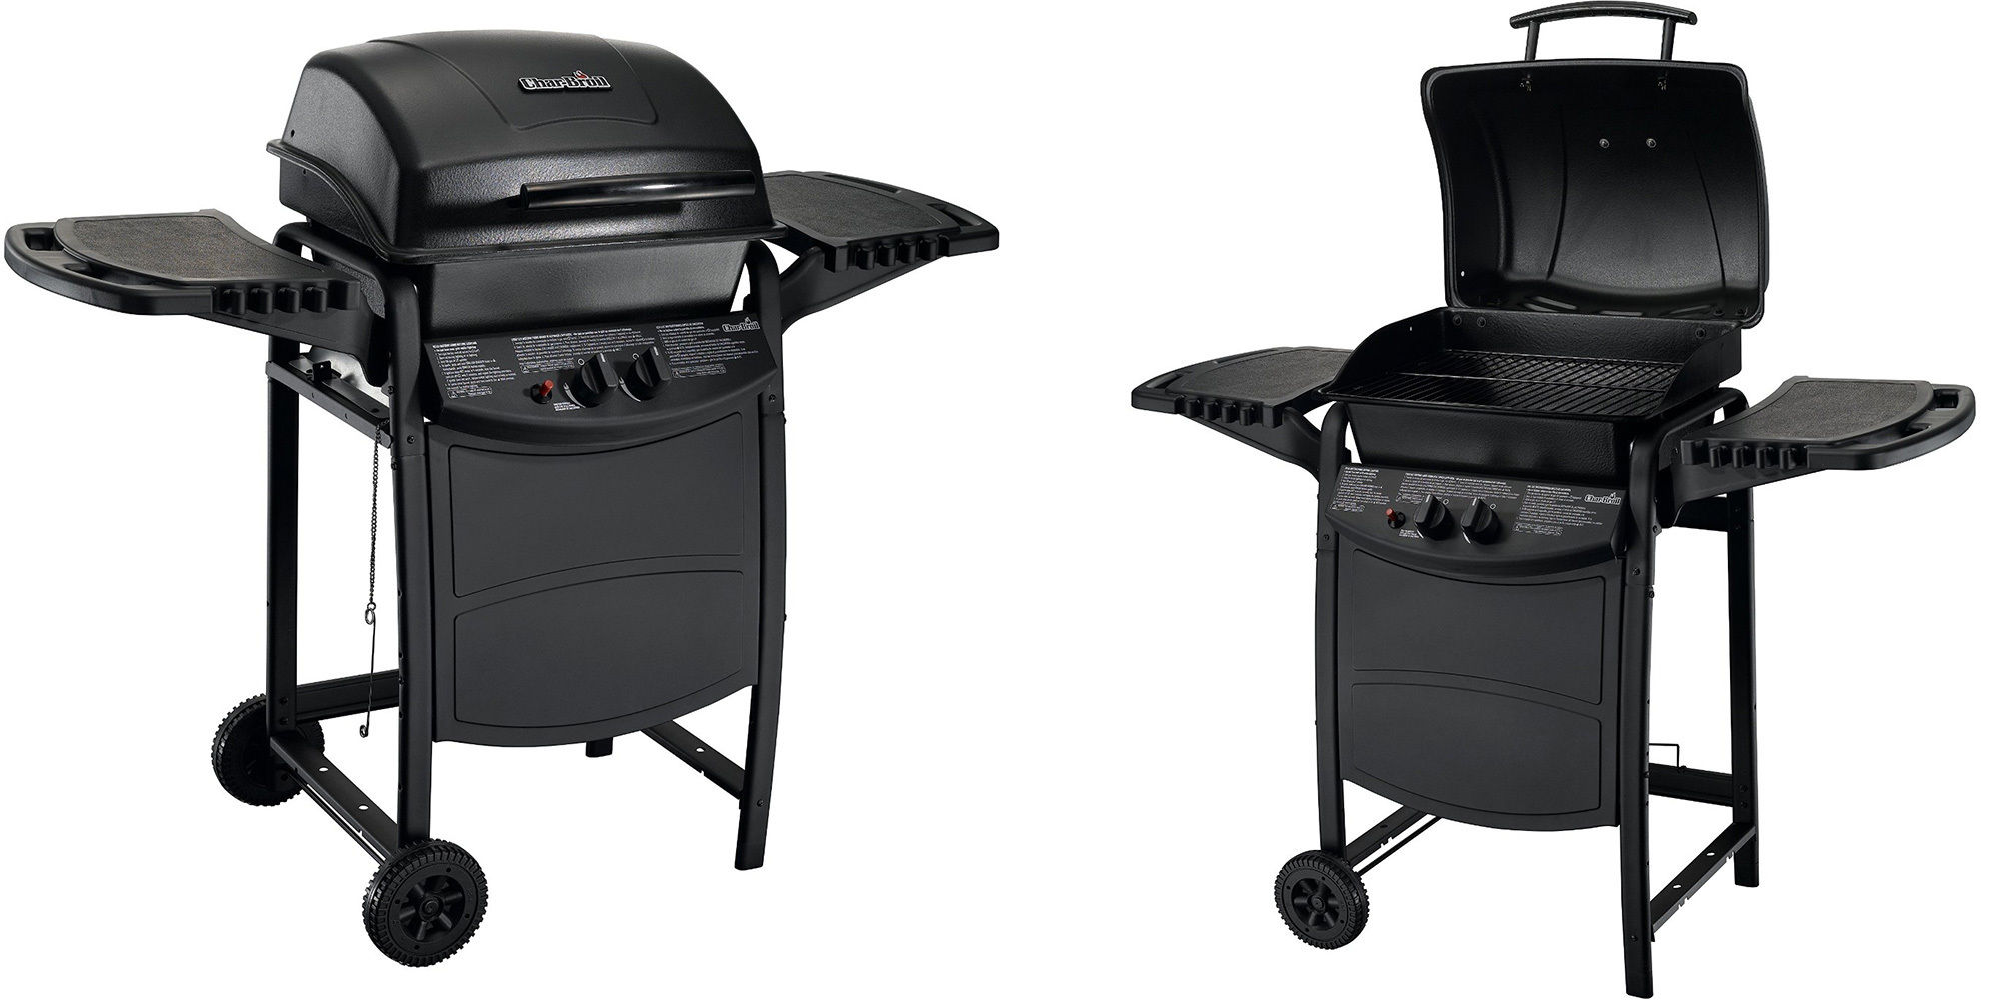 Char-Broil Traditional 2-burner Gas Grill Only $74.00!